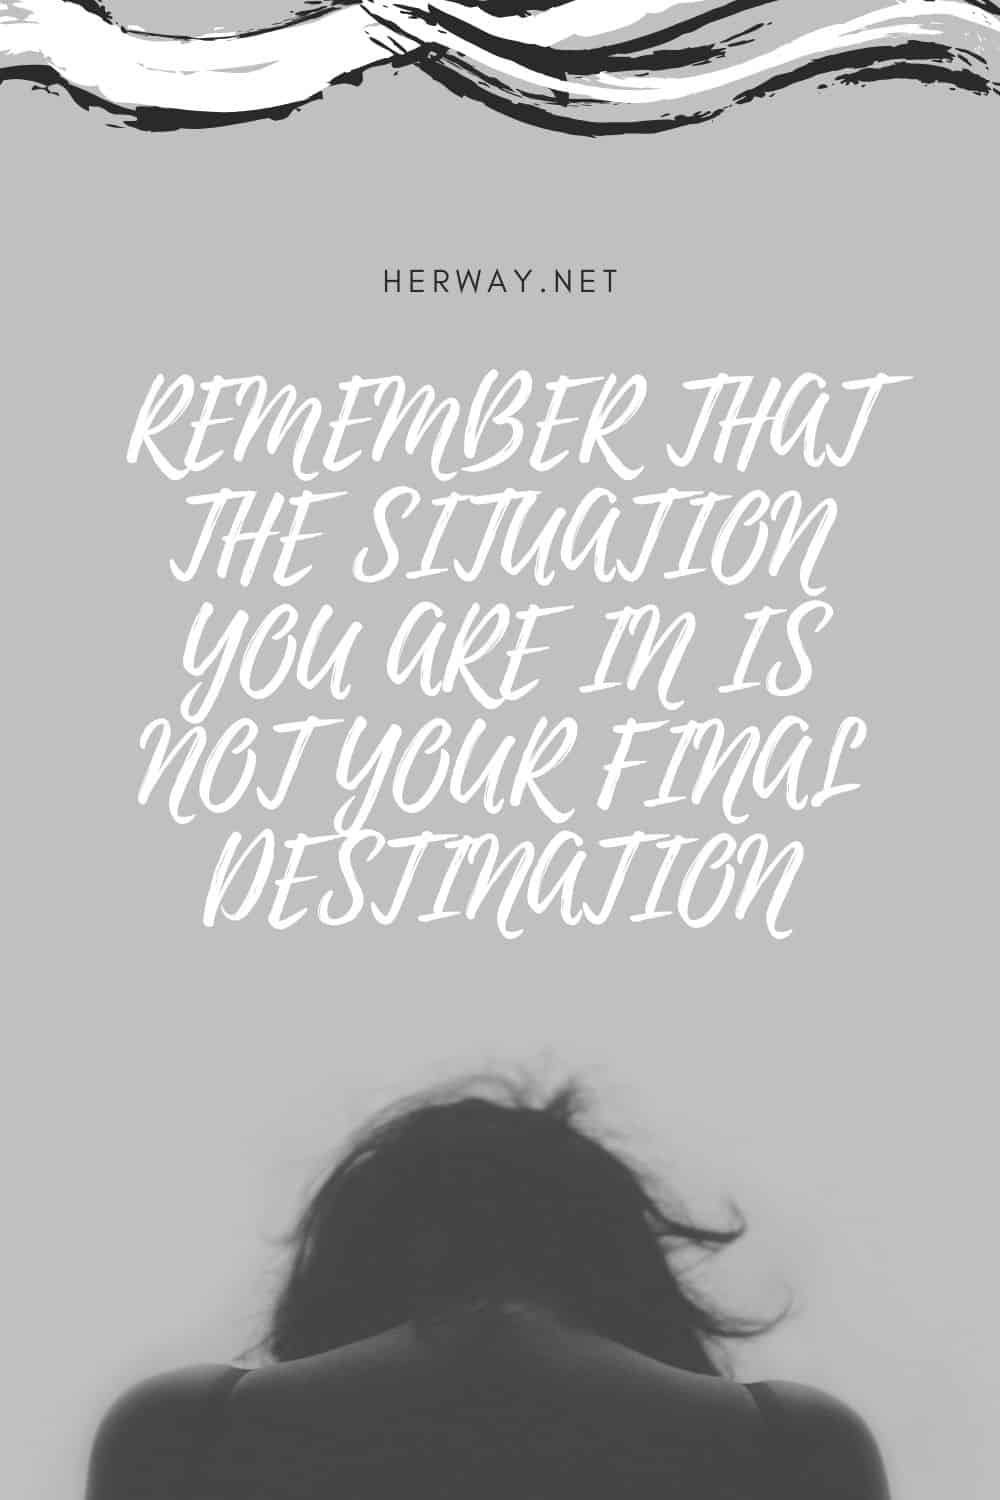 REMEMBER THAT THE SITUATION YOU ARE IN IS NOT YOUR FINAL DESTINATION